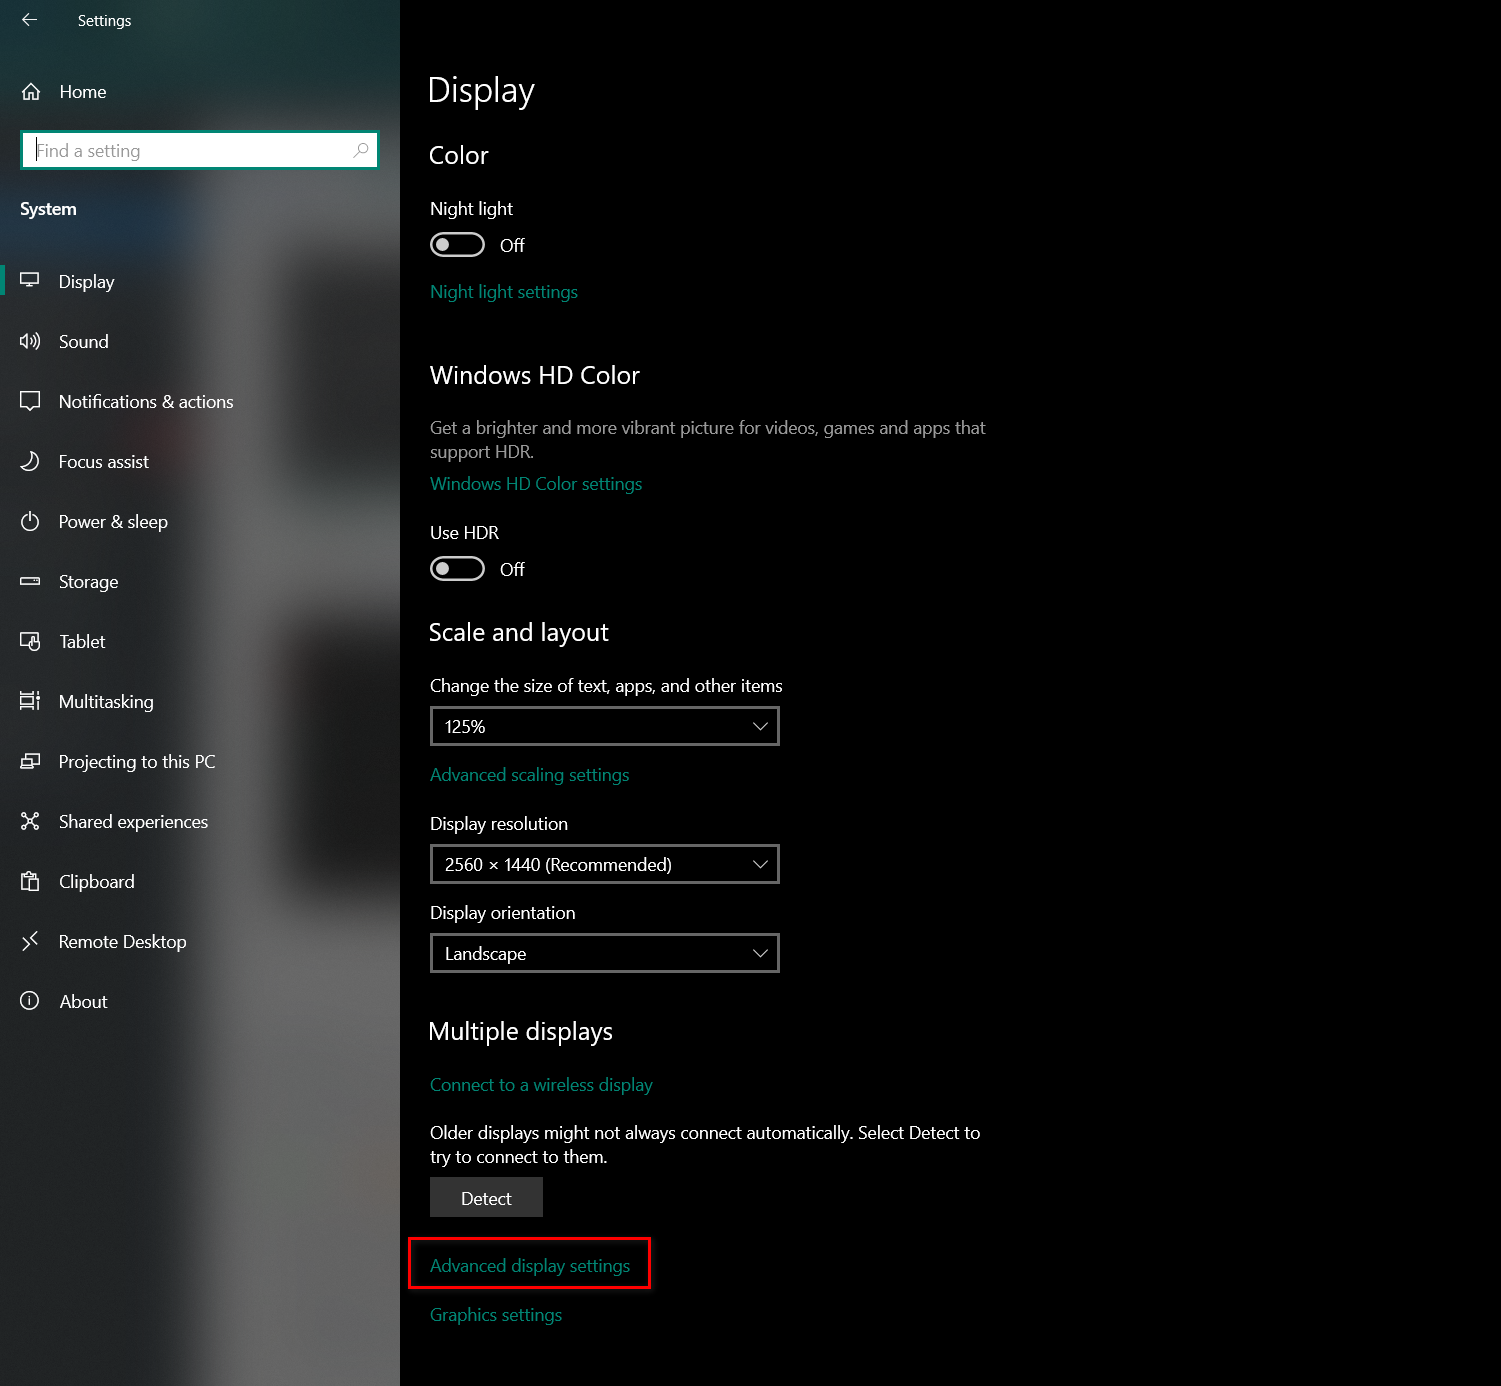 How to access Advanced Display Settings